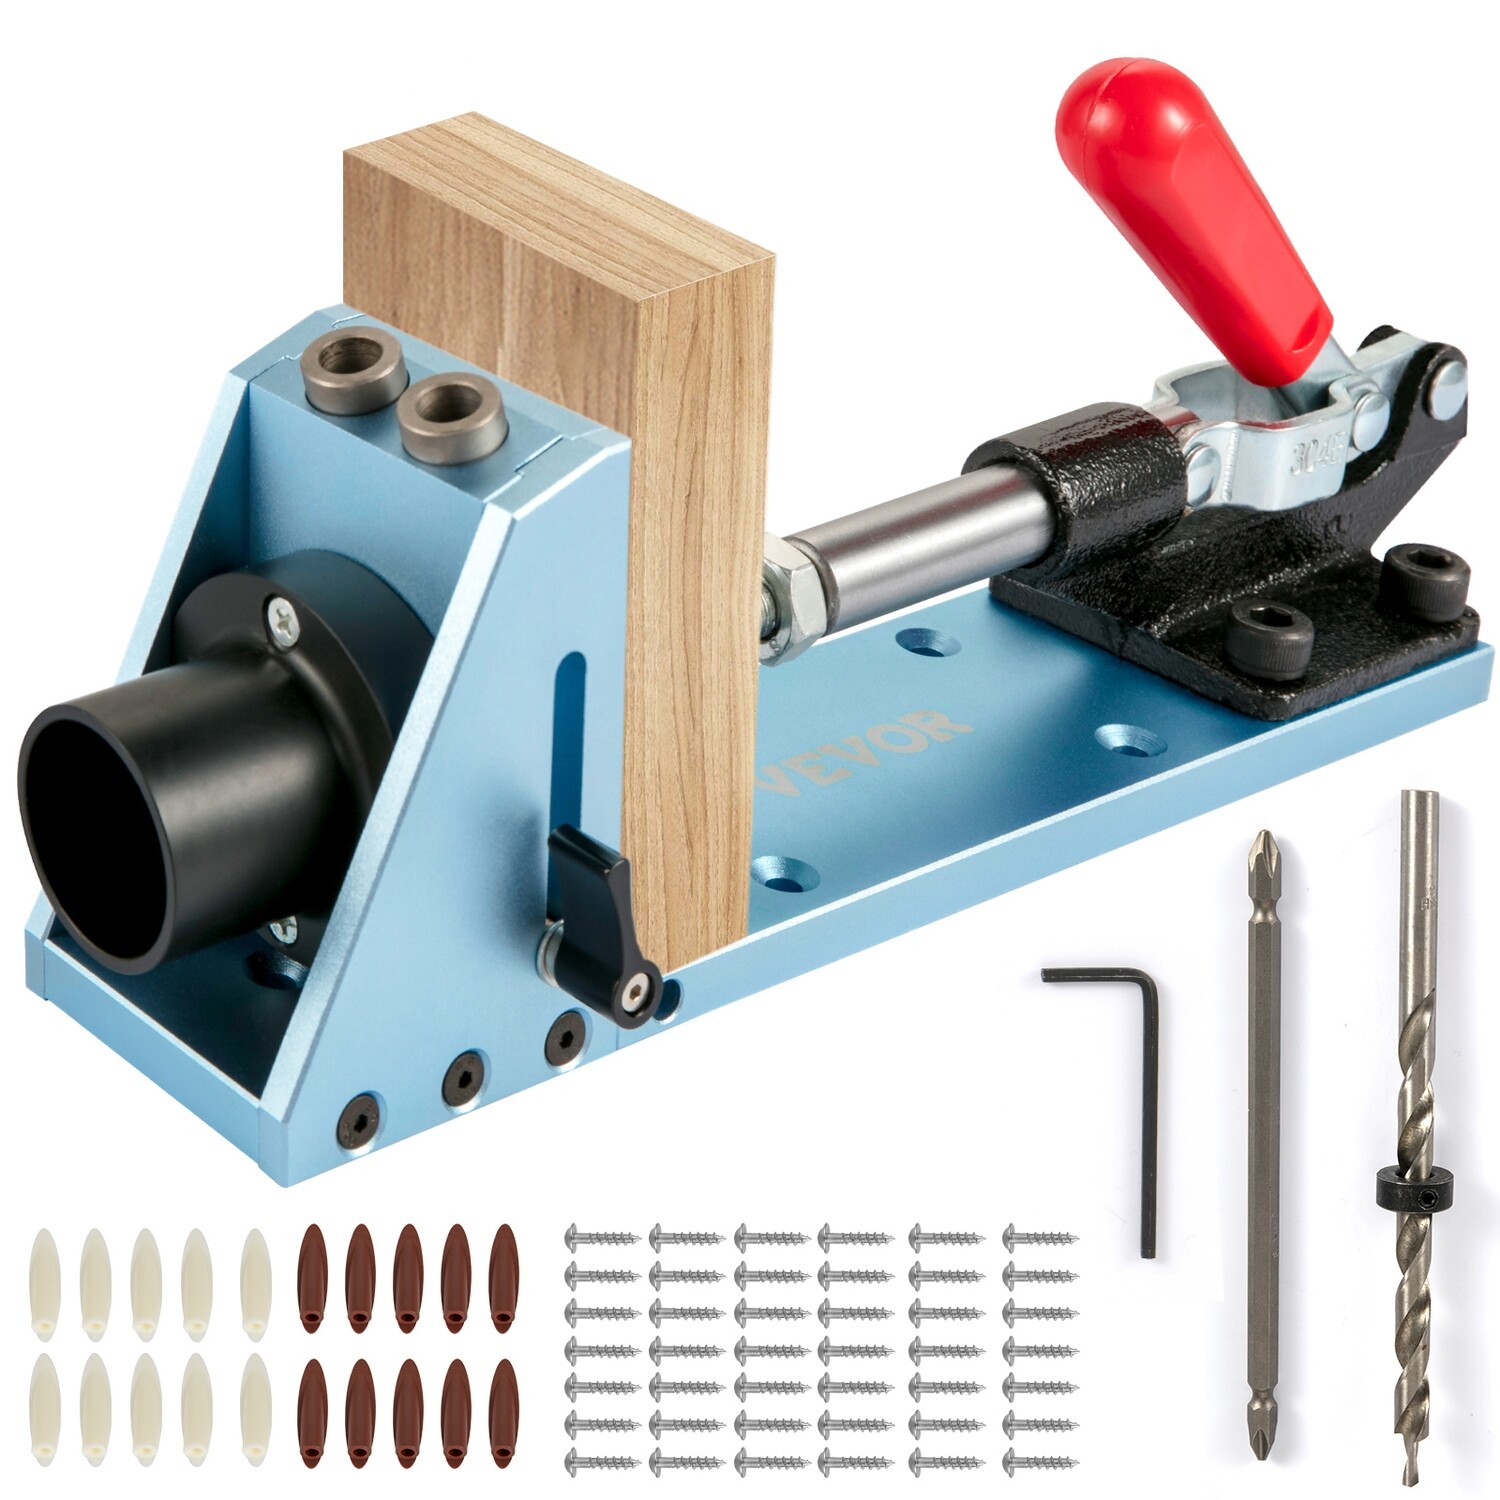 Kit for Pocket Hole Jigs Carving Tools for Carpenters and Joiners